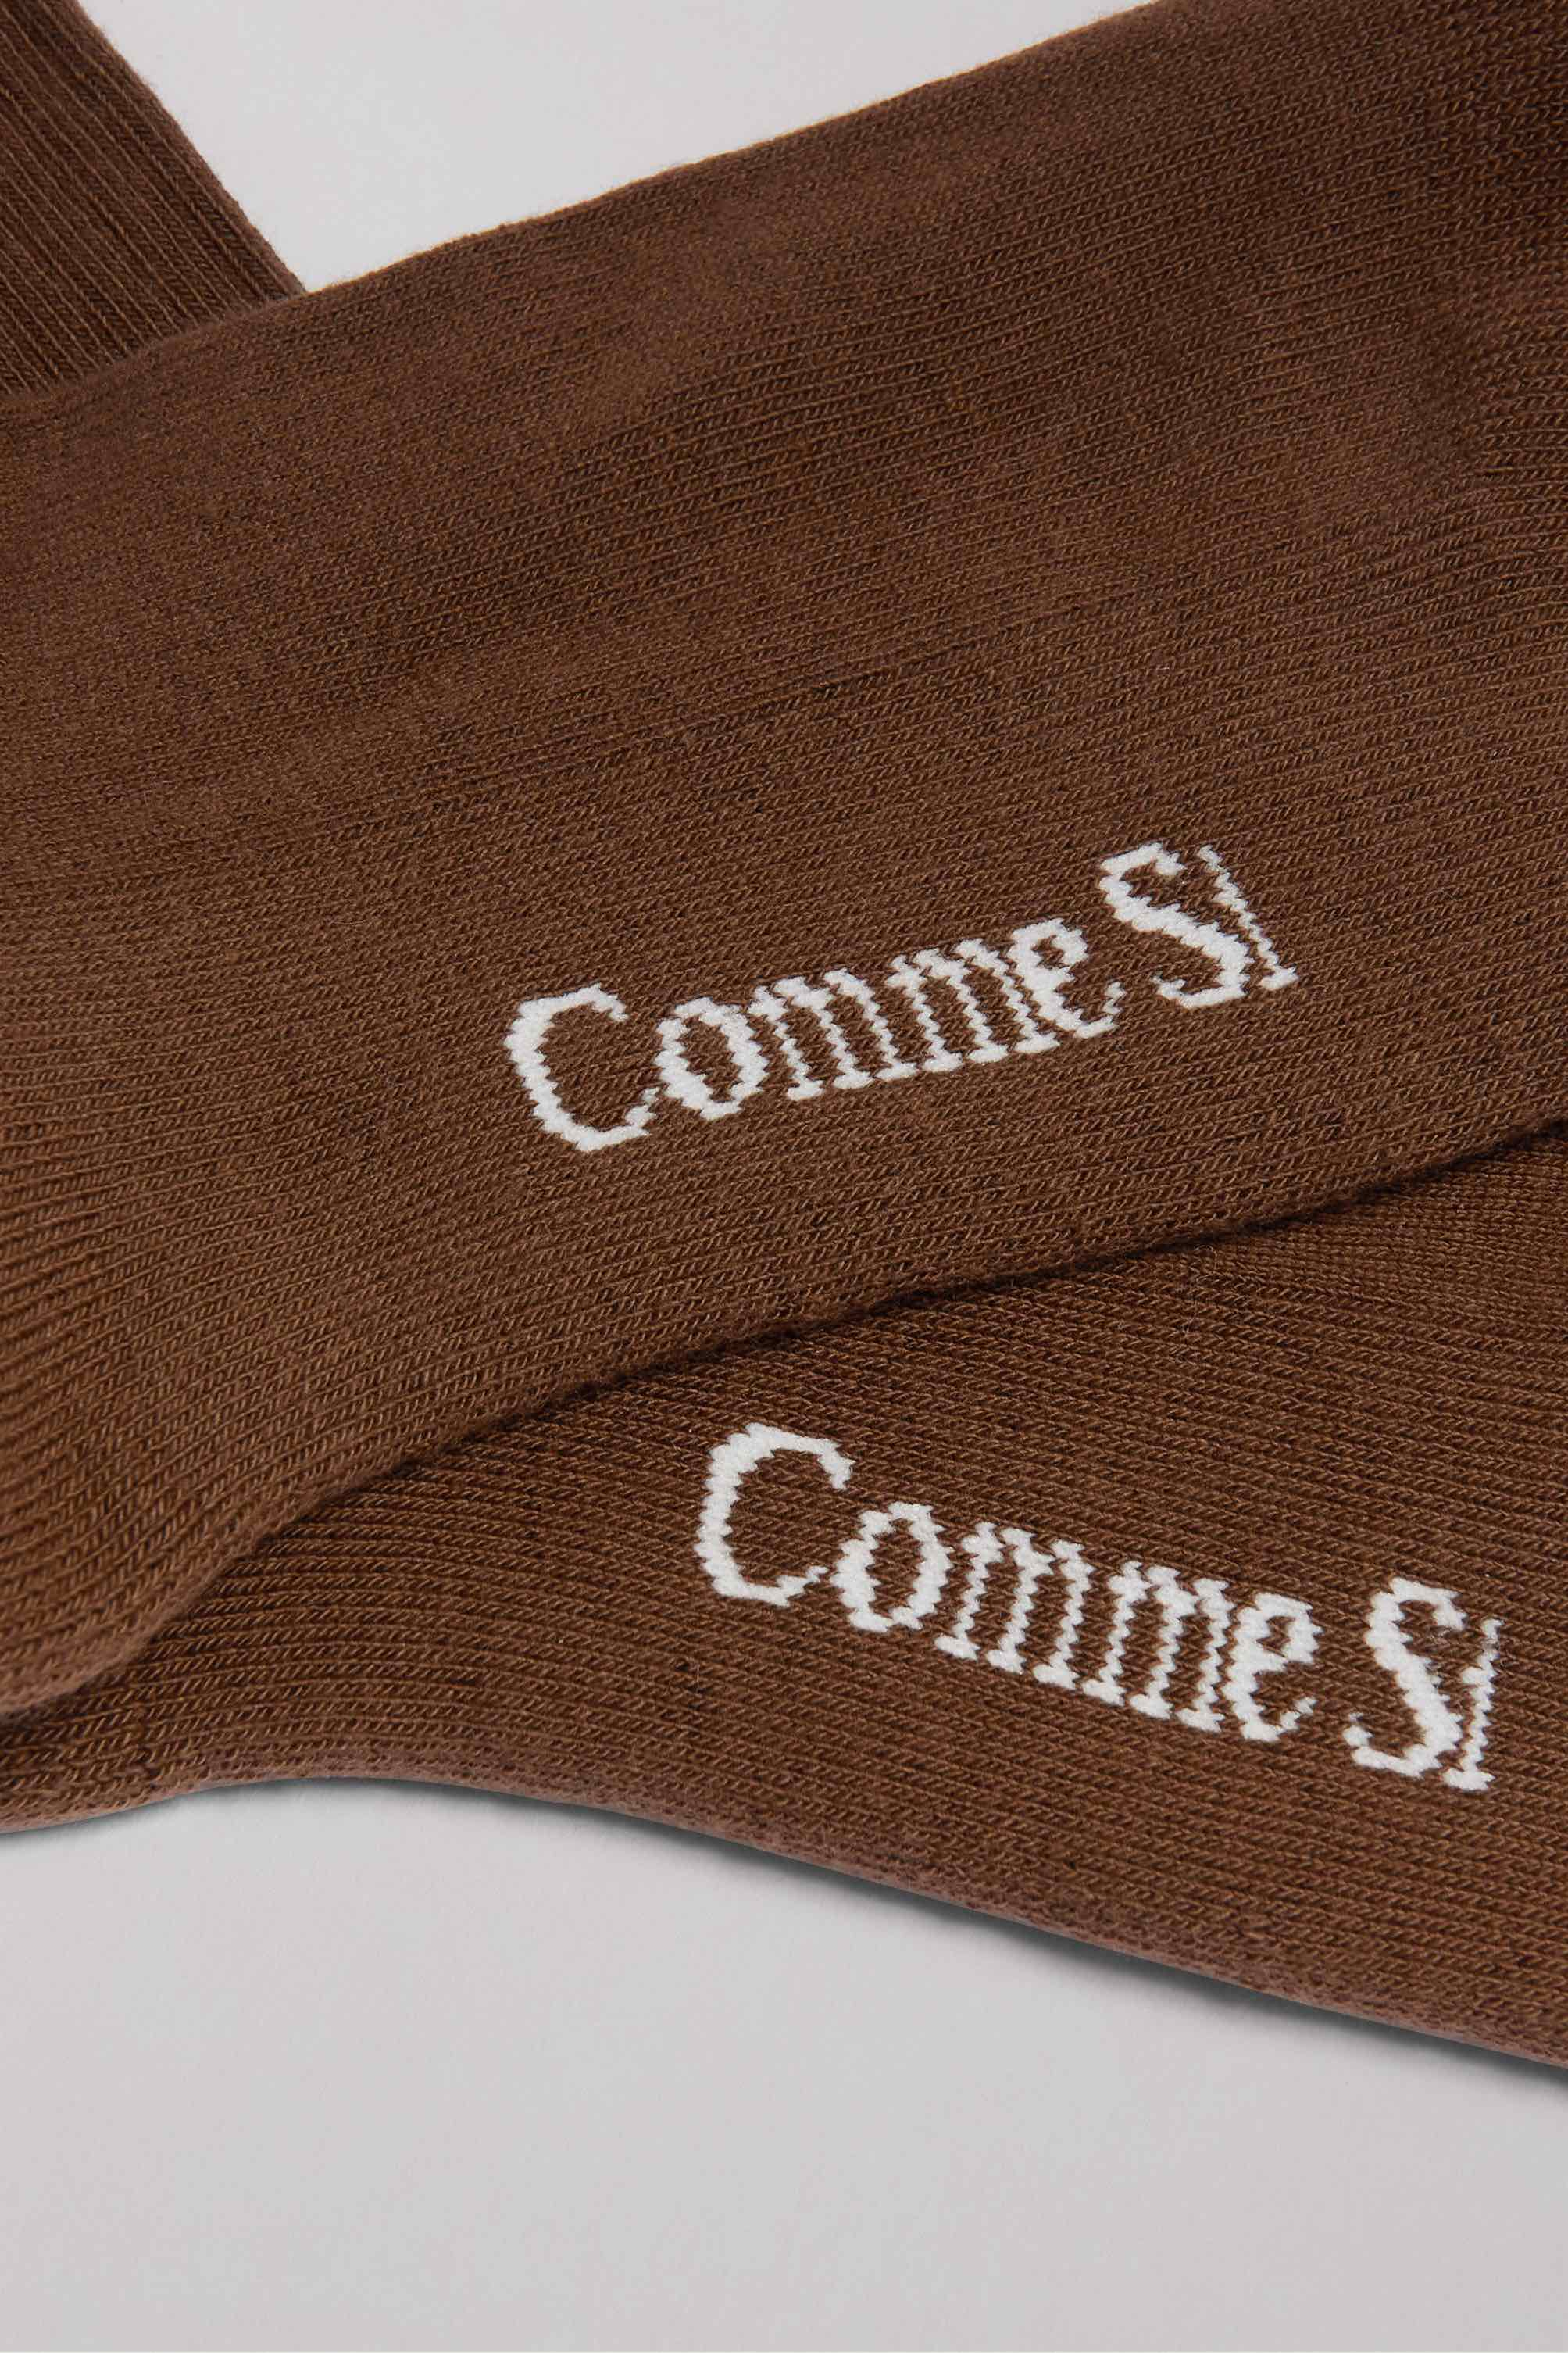 Footbed detail, The Everyday Sock in Brown, made with Organic Egyptian Cotton, by Comme Si